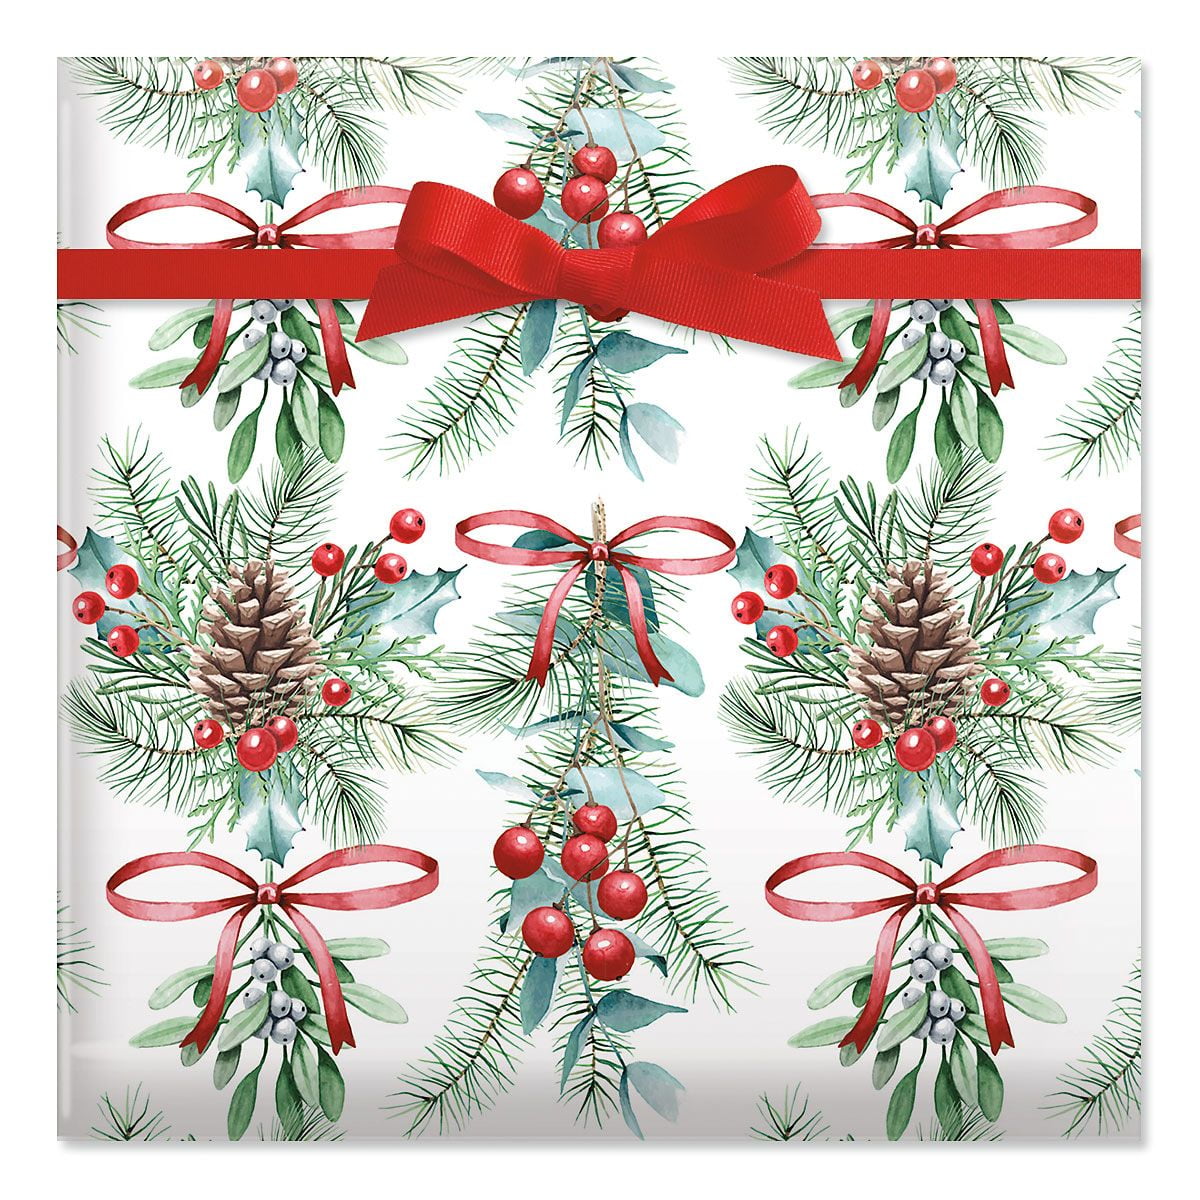 Holly and Mistletoe Gift Wrapping Paper on Gold Foil - 76 cm x 2.44 m Roll